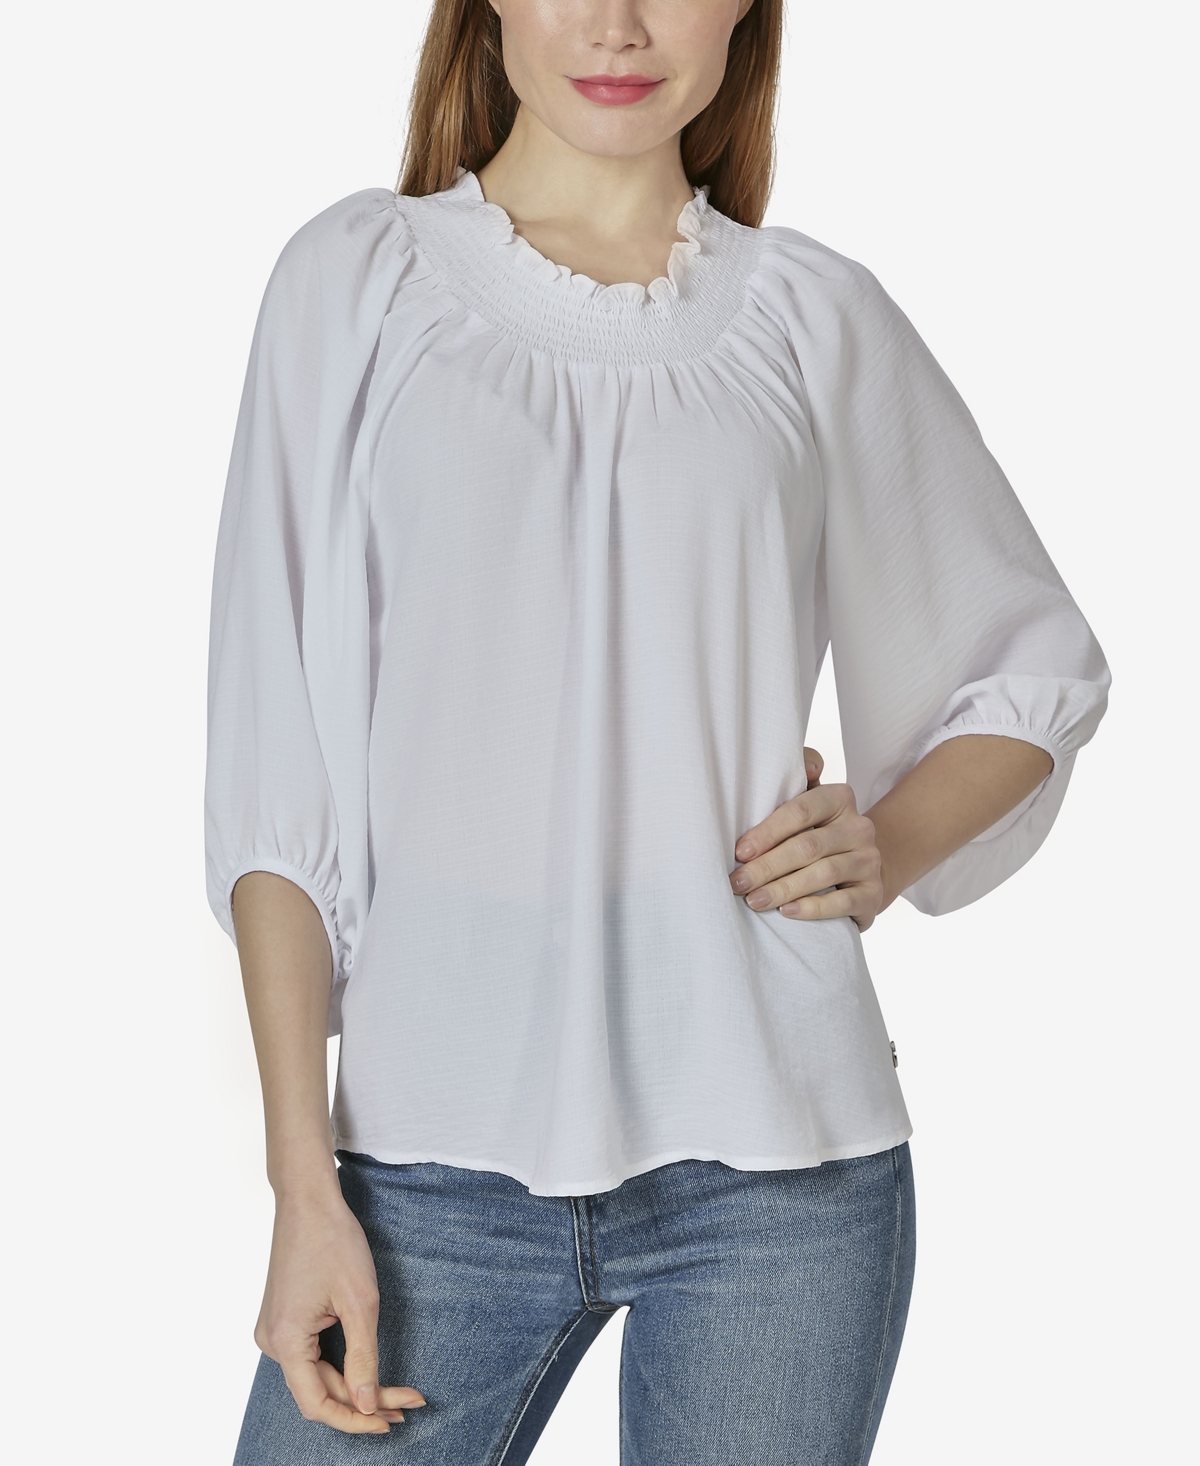 Women's On or Off The Shoulder 3/4 Sleeve Peasant Top - Bright White